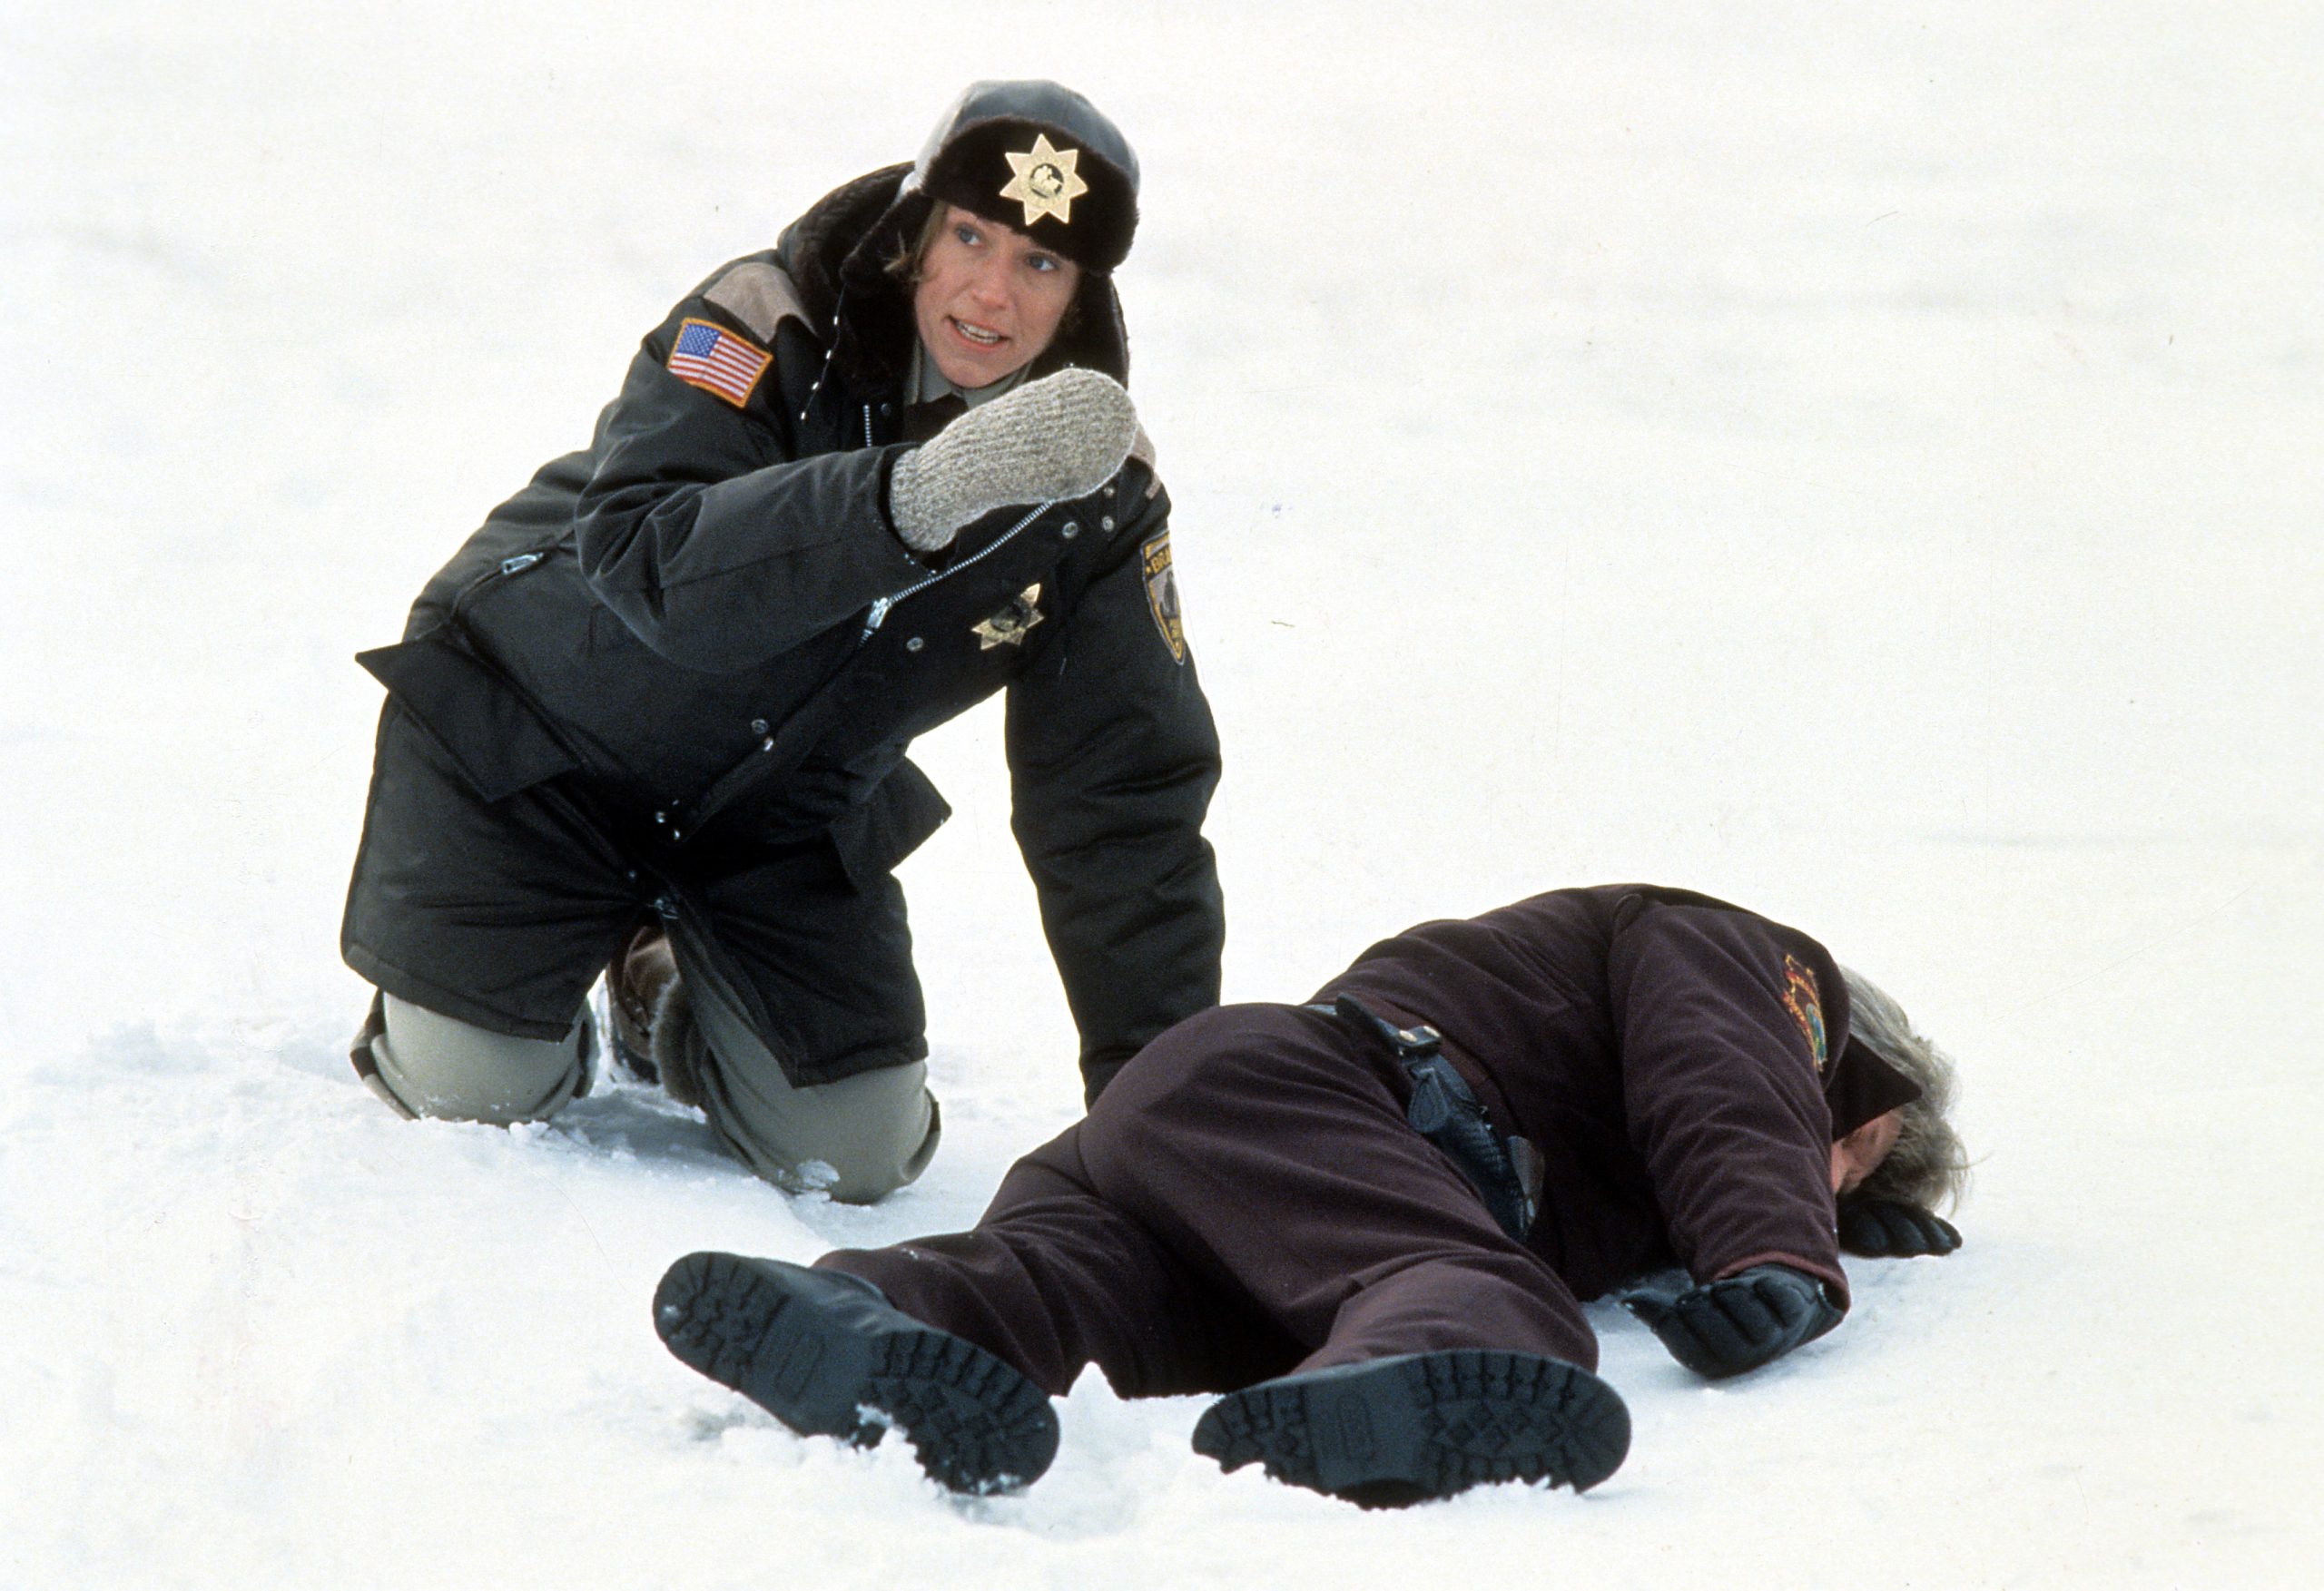 A still from the Coen Brothers' Fargo